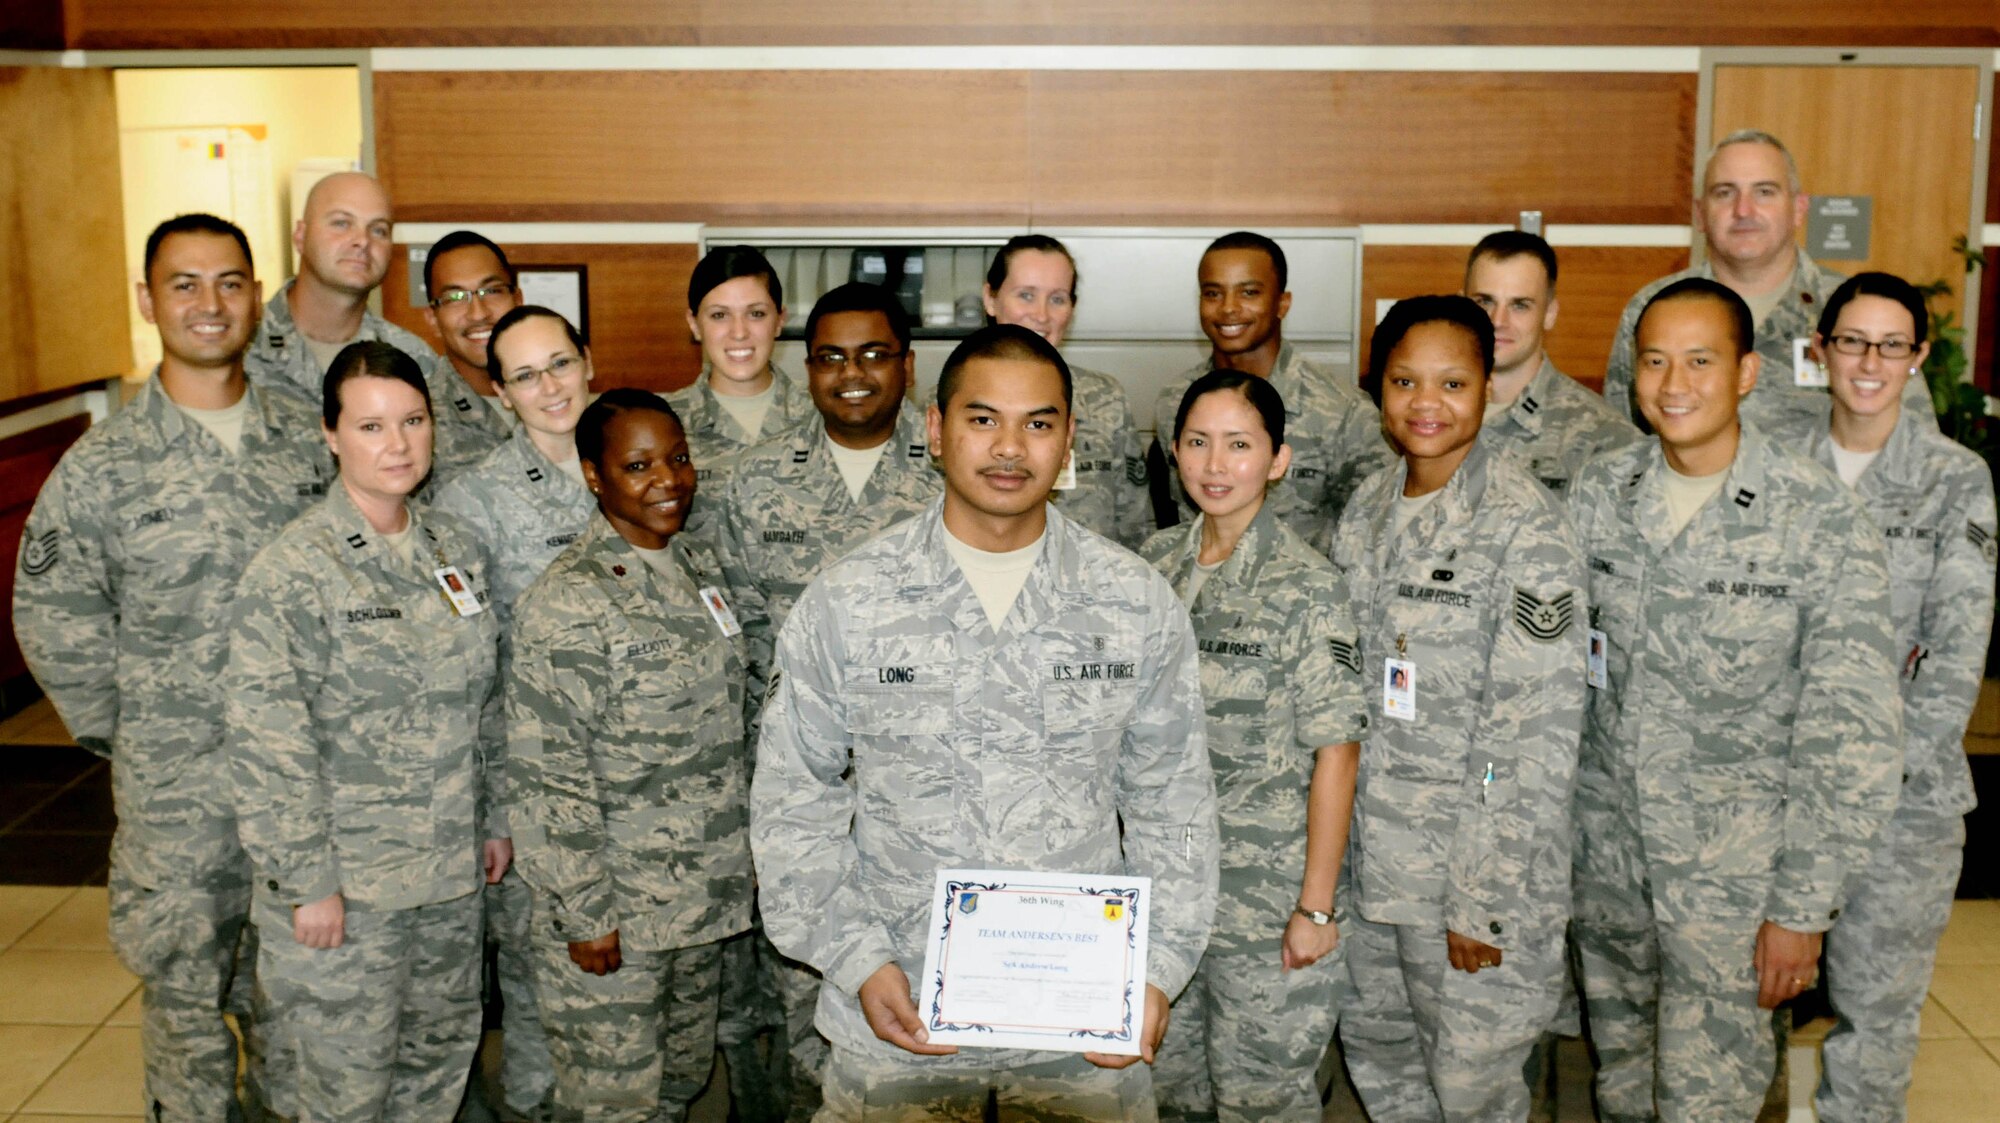 ANDERSEN AIR FORCE BASE, Guam— Senior Airman Andrew Long, 36th Medical Group aerospace medical technician, was awarded Team Andersen’s Best August 16. Team Andersen's Best is a recognition program which highlights a top performer from the 36th Wing. Each week, supervisors nominate a member of their team for outstanding performance and the wing commander presents the selected Airman/civilian with an award. To nominate your Airman/civilian for Andersen's Best, contact your unit chief or superintendent explaining their accomplishments. (U.S. Air Force photo by Airman 1st Class Mariah Haddenham/Released)